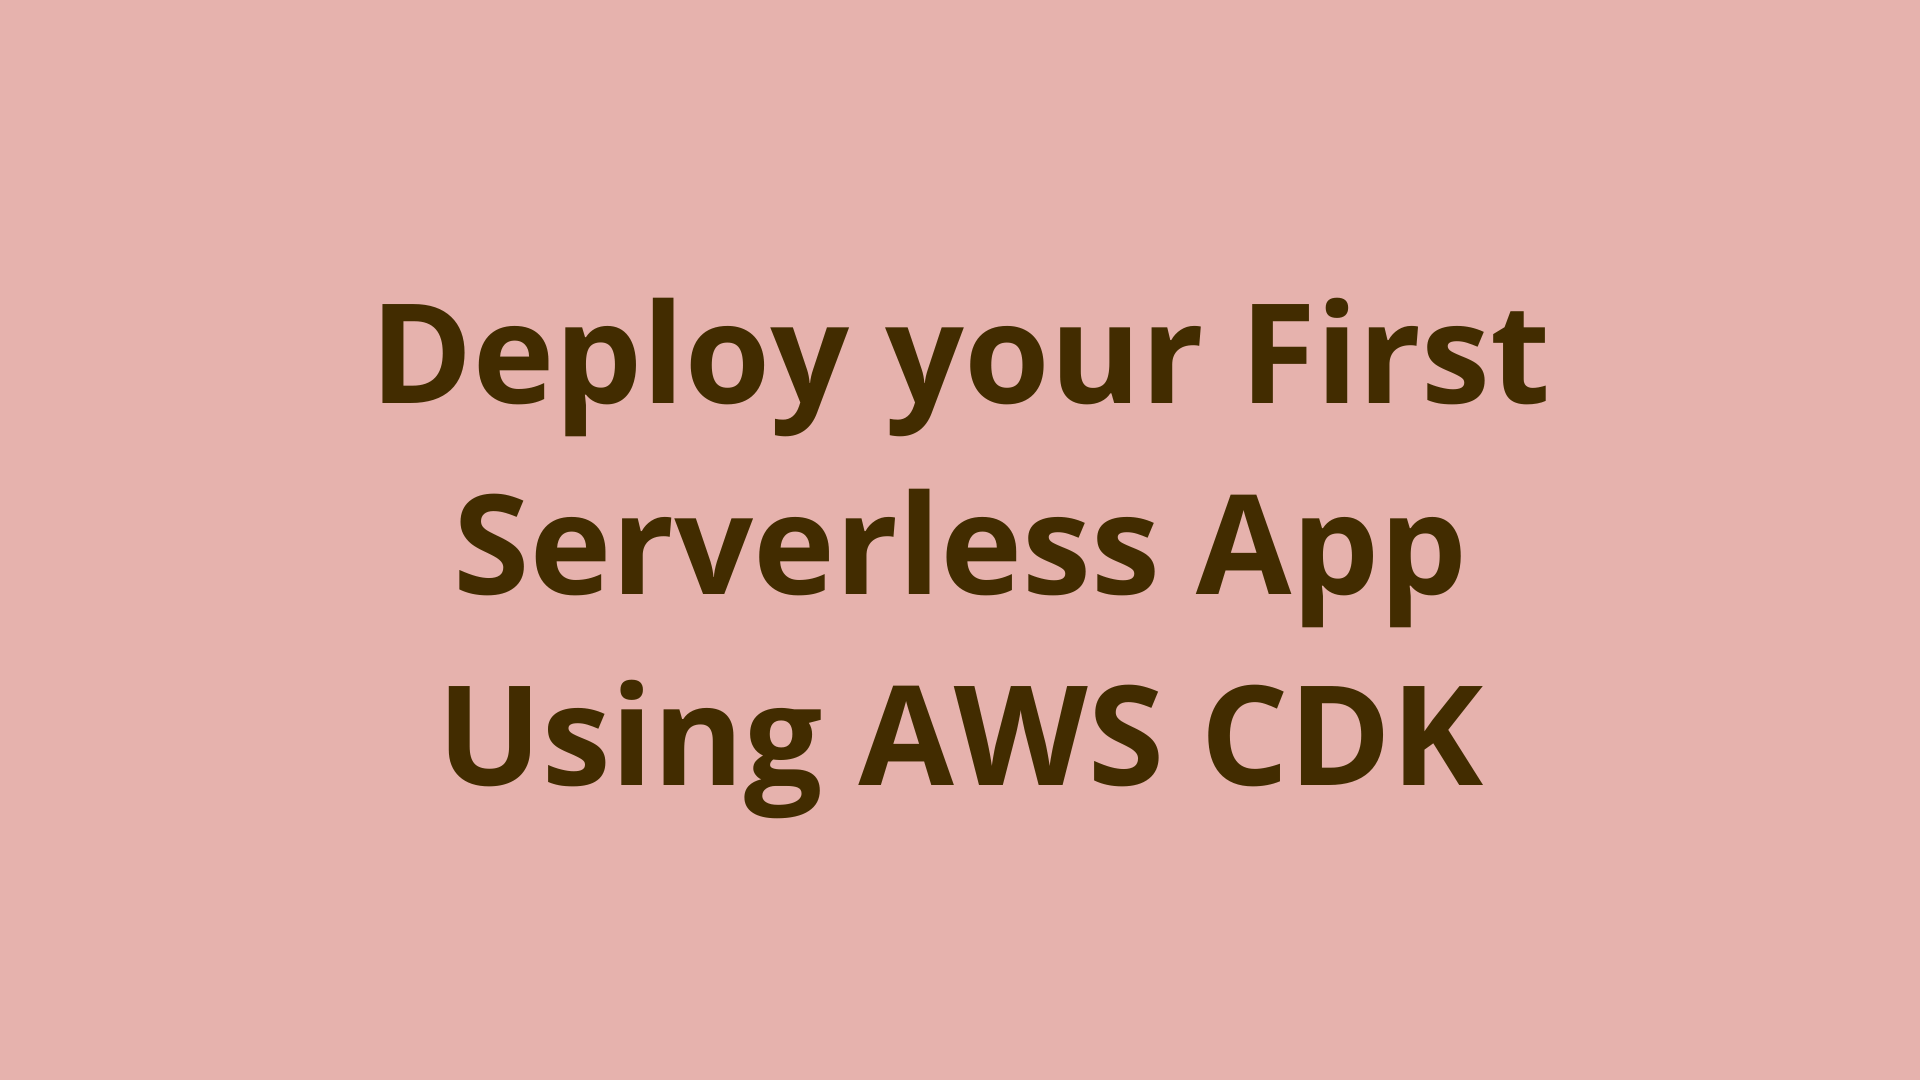 Image of Deploy your First Serverless App Using AWS CDK